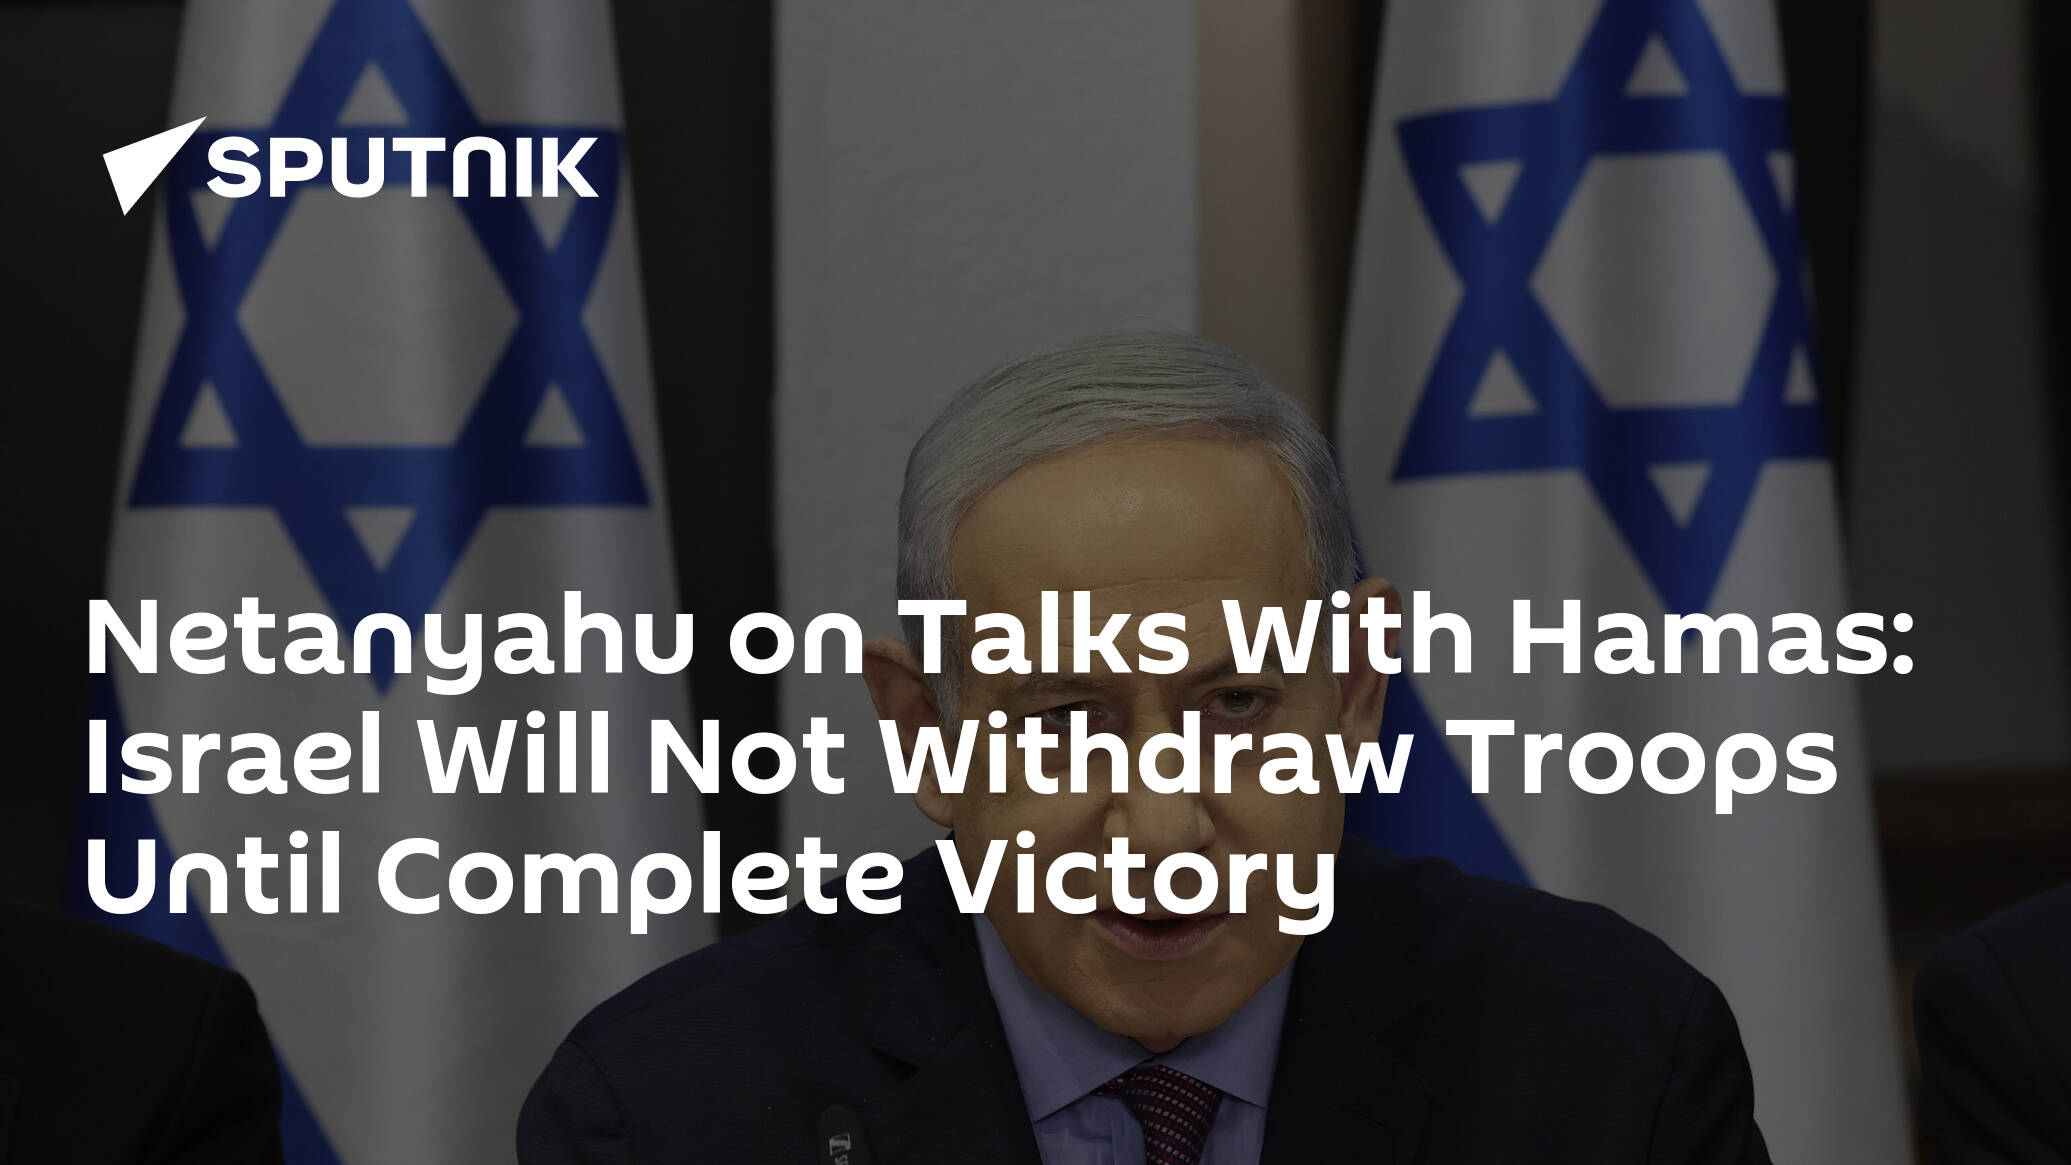 Netanyahu on Talks With Hamas: Israel Will Not Withdraw Troops Until Complete Victory